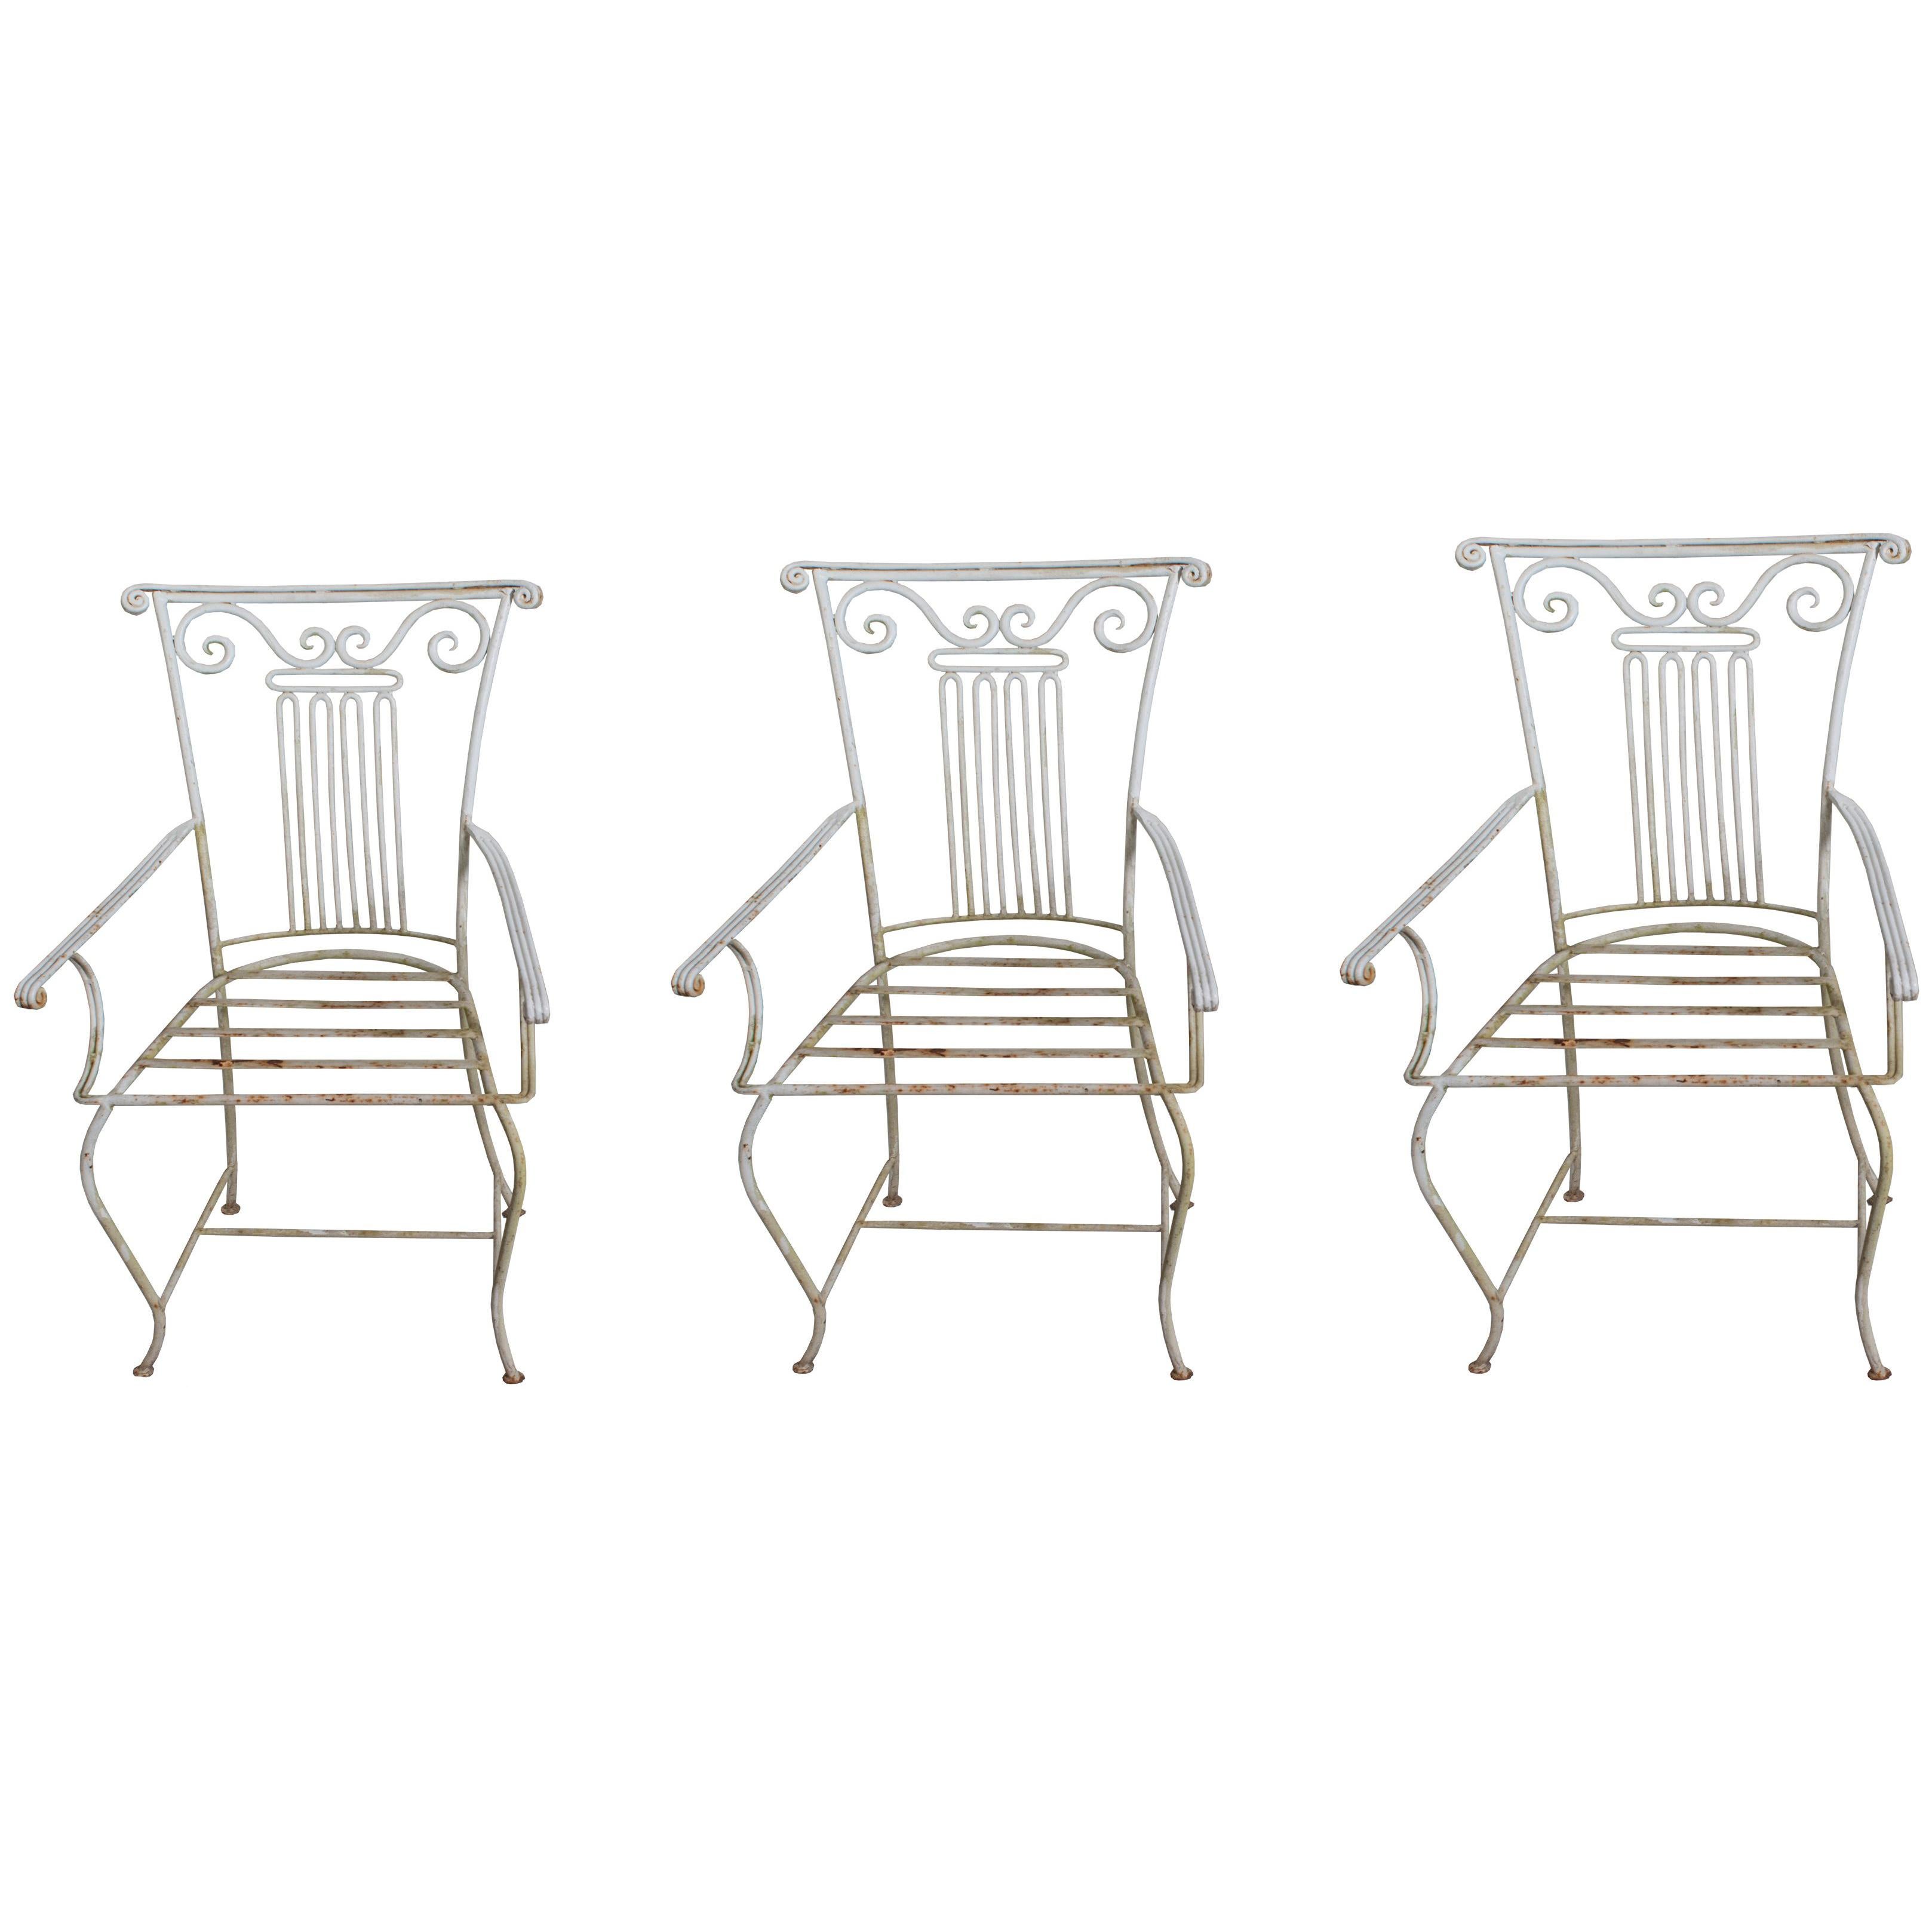 Three Neoclassical Wrought Iron Garden Chairs sold individually For Sale